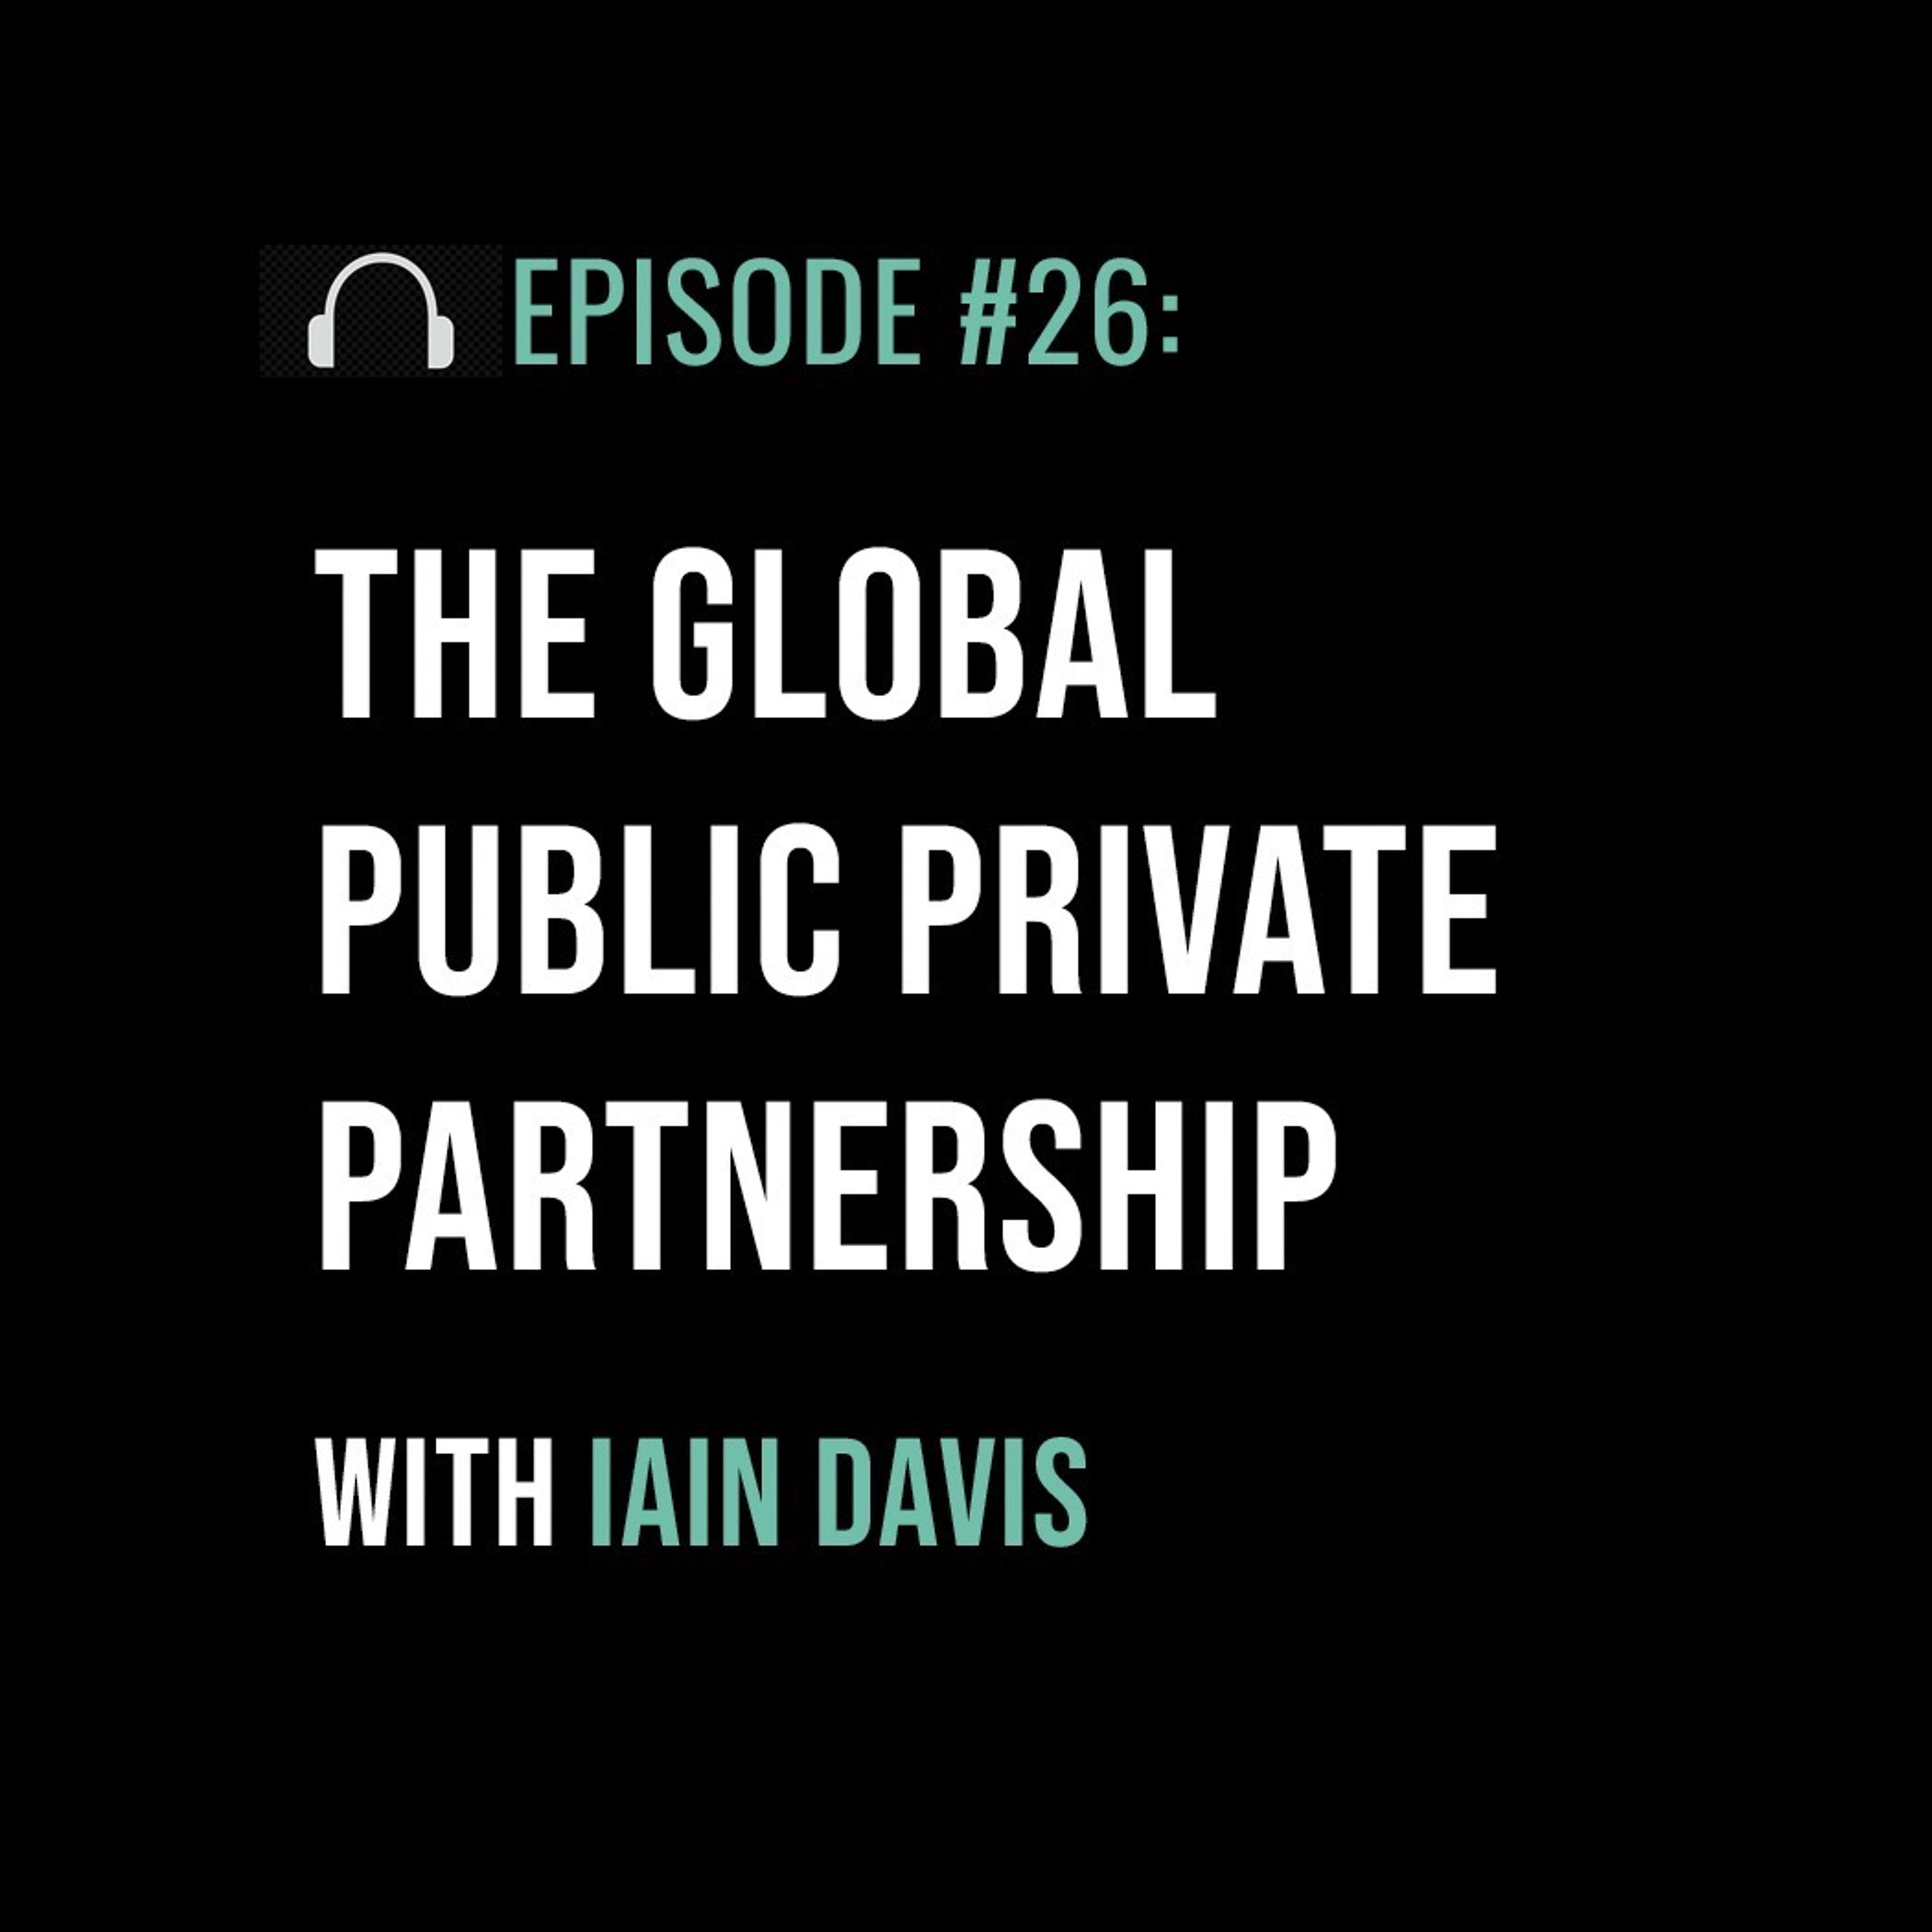 The Global Public Private Partnership with lain Davis